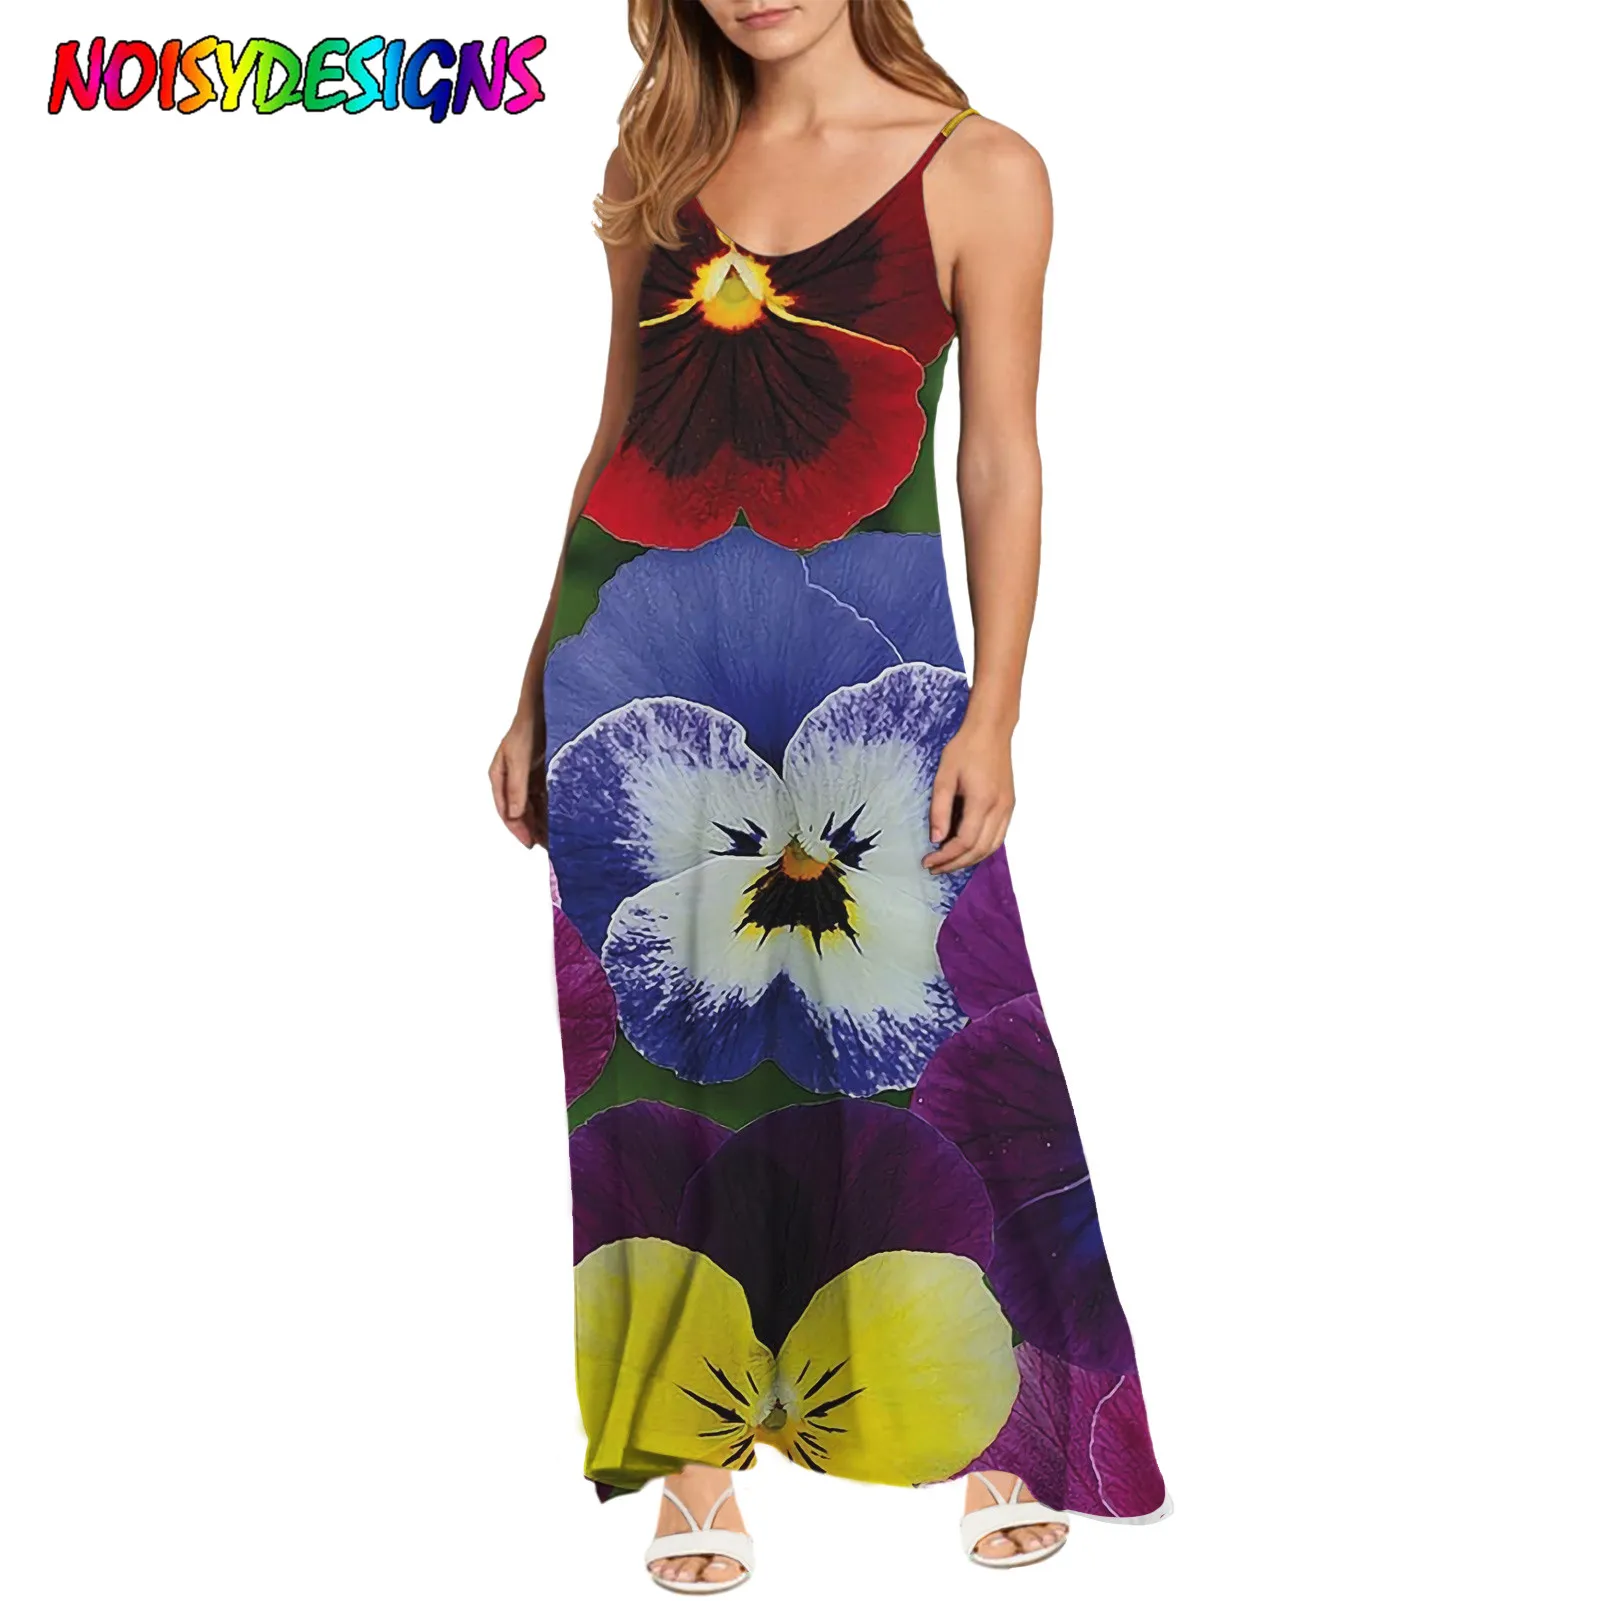 NOISYDESIGNS Summer Holiday Dress Spaghetti Strap Colorful Pansy Flowers Prints Beach Style Ankle-Length Women Dresses Soft